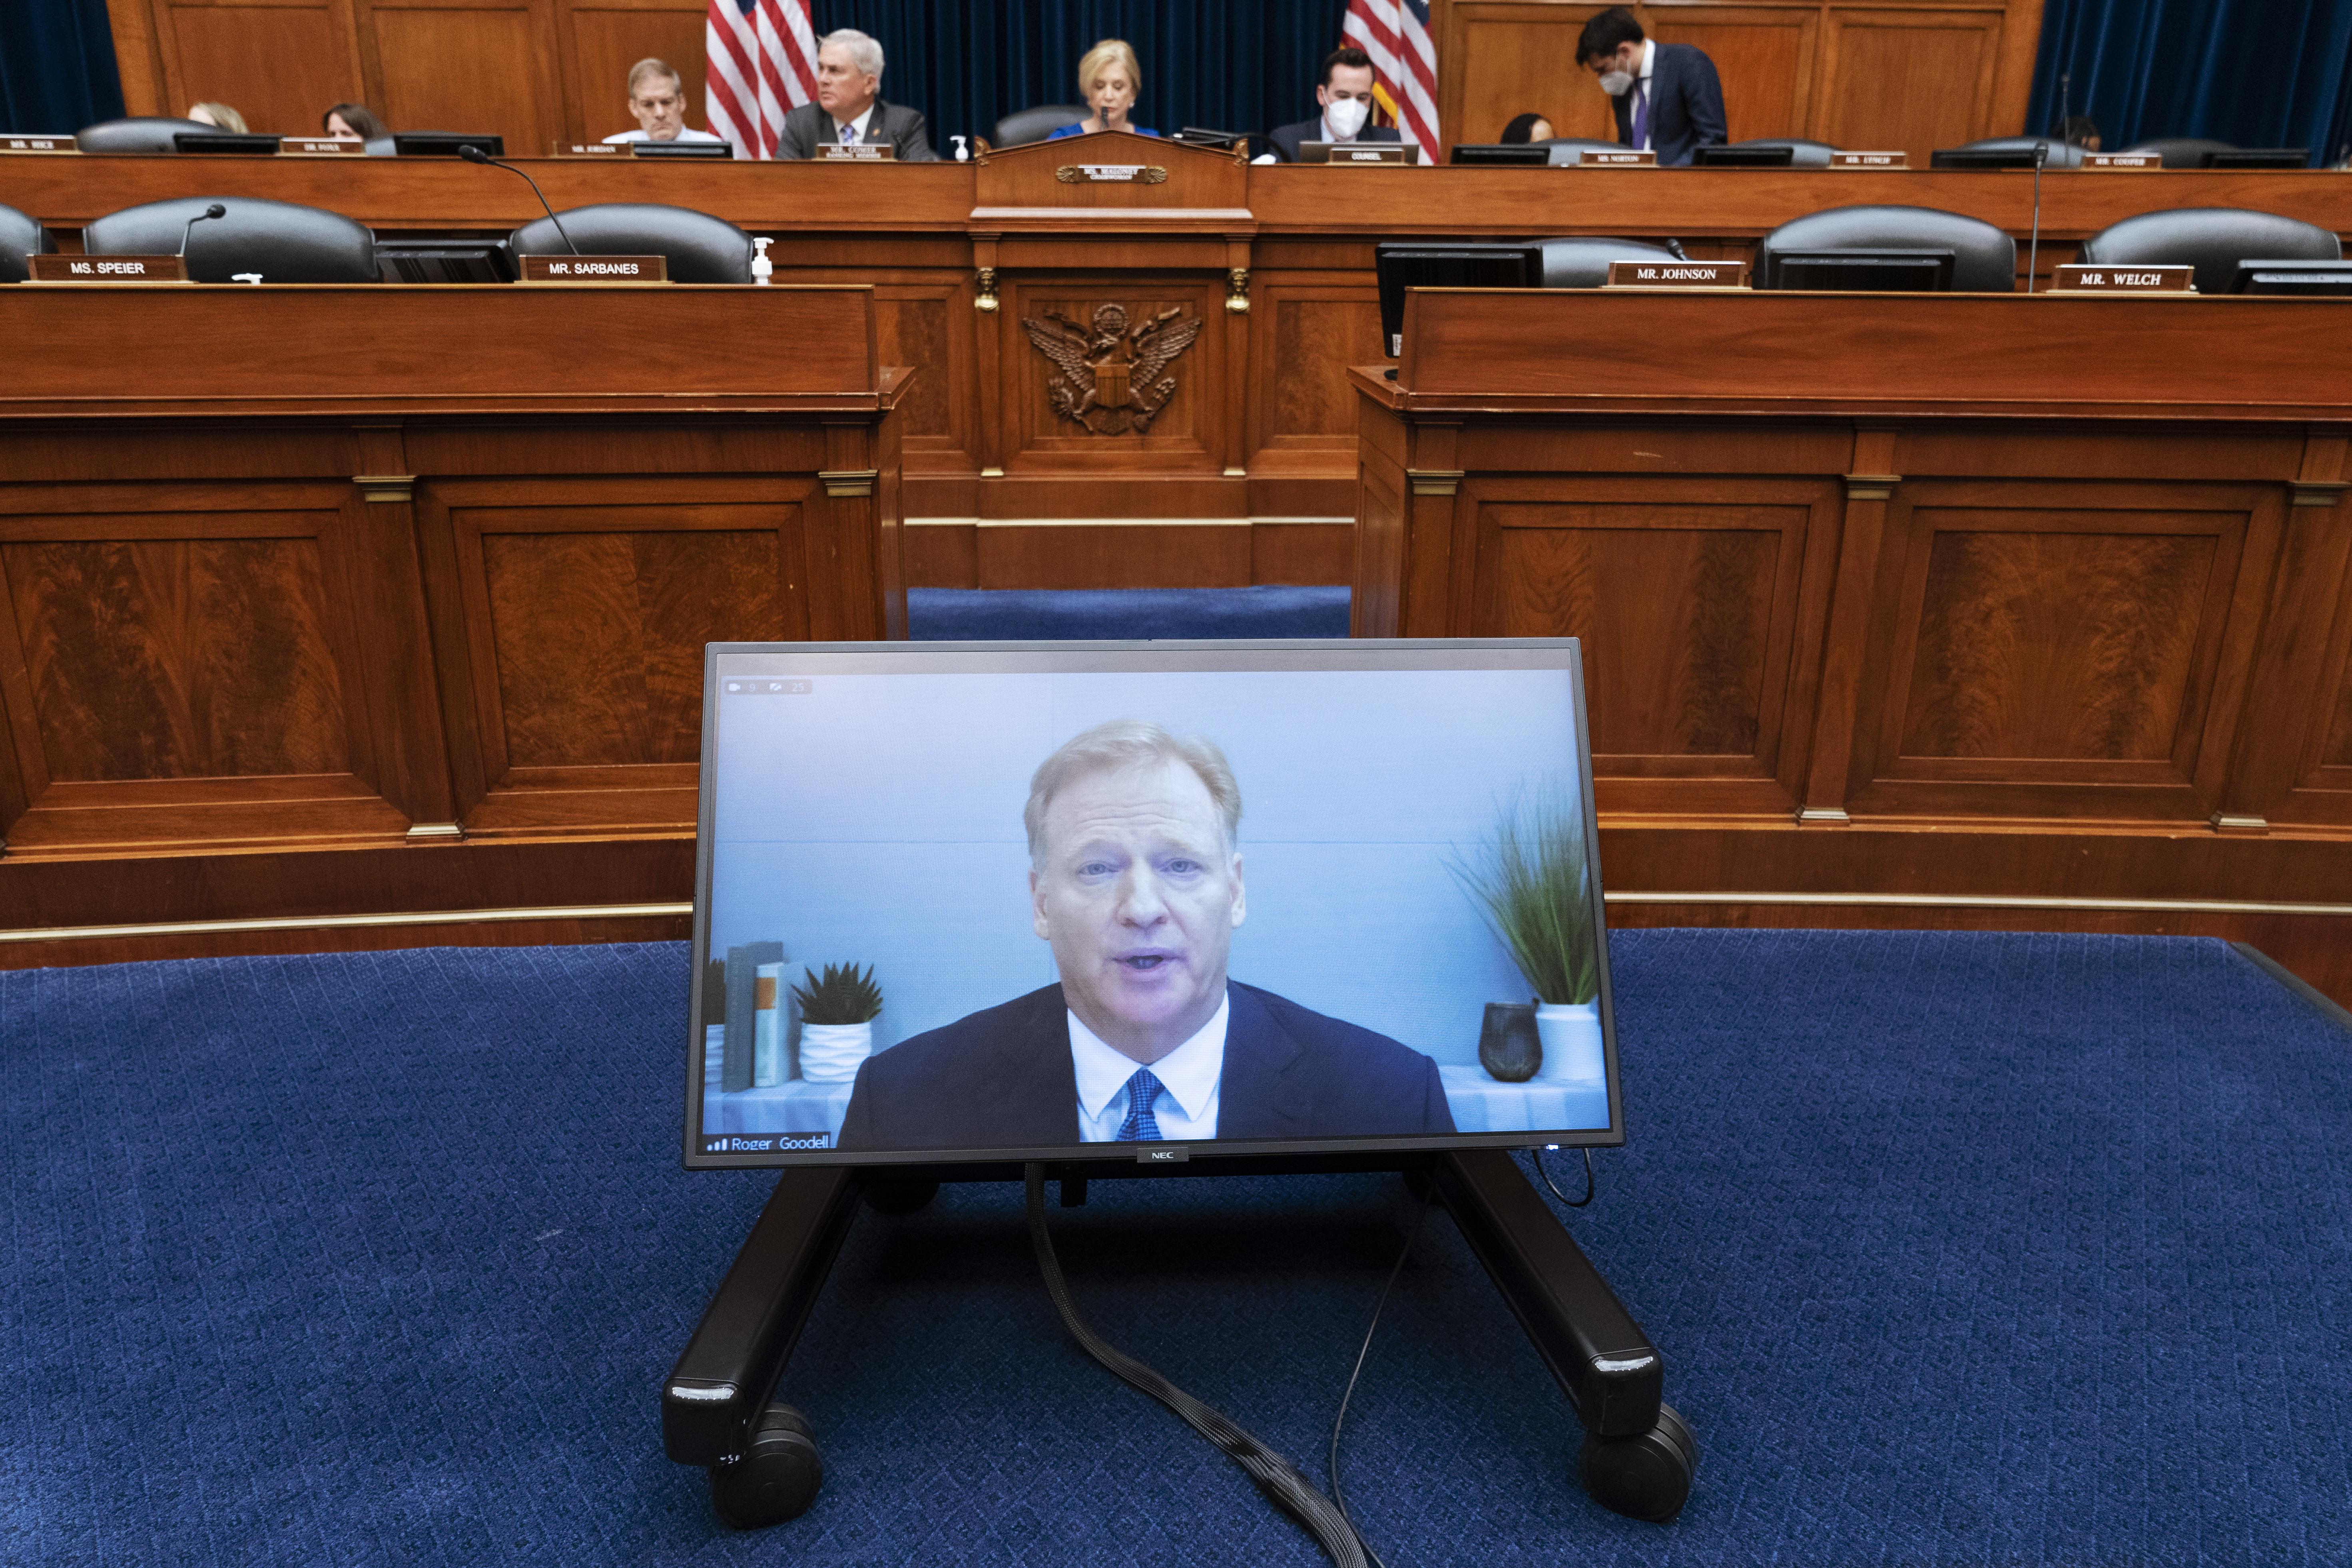 NFL Commissioner Roger Goodell testifies virtually, Wednesday, June 22, 2022, during a House Oversight Committee hearing on the Washington Commanders' workplace conduct, on Capitol Hill in Washington. Team owner Dan Snyder did not attend the hearing. (AP Photo/Jacquelyn Martin)